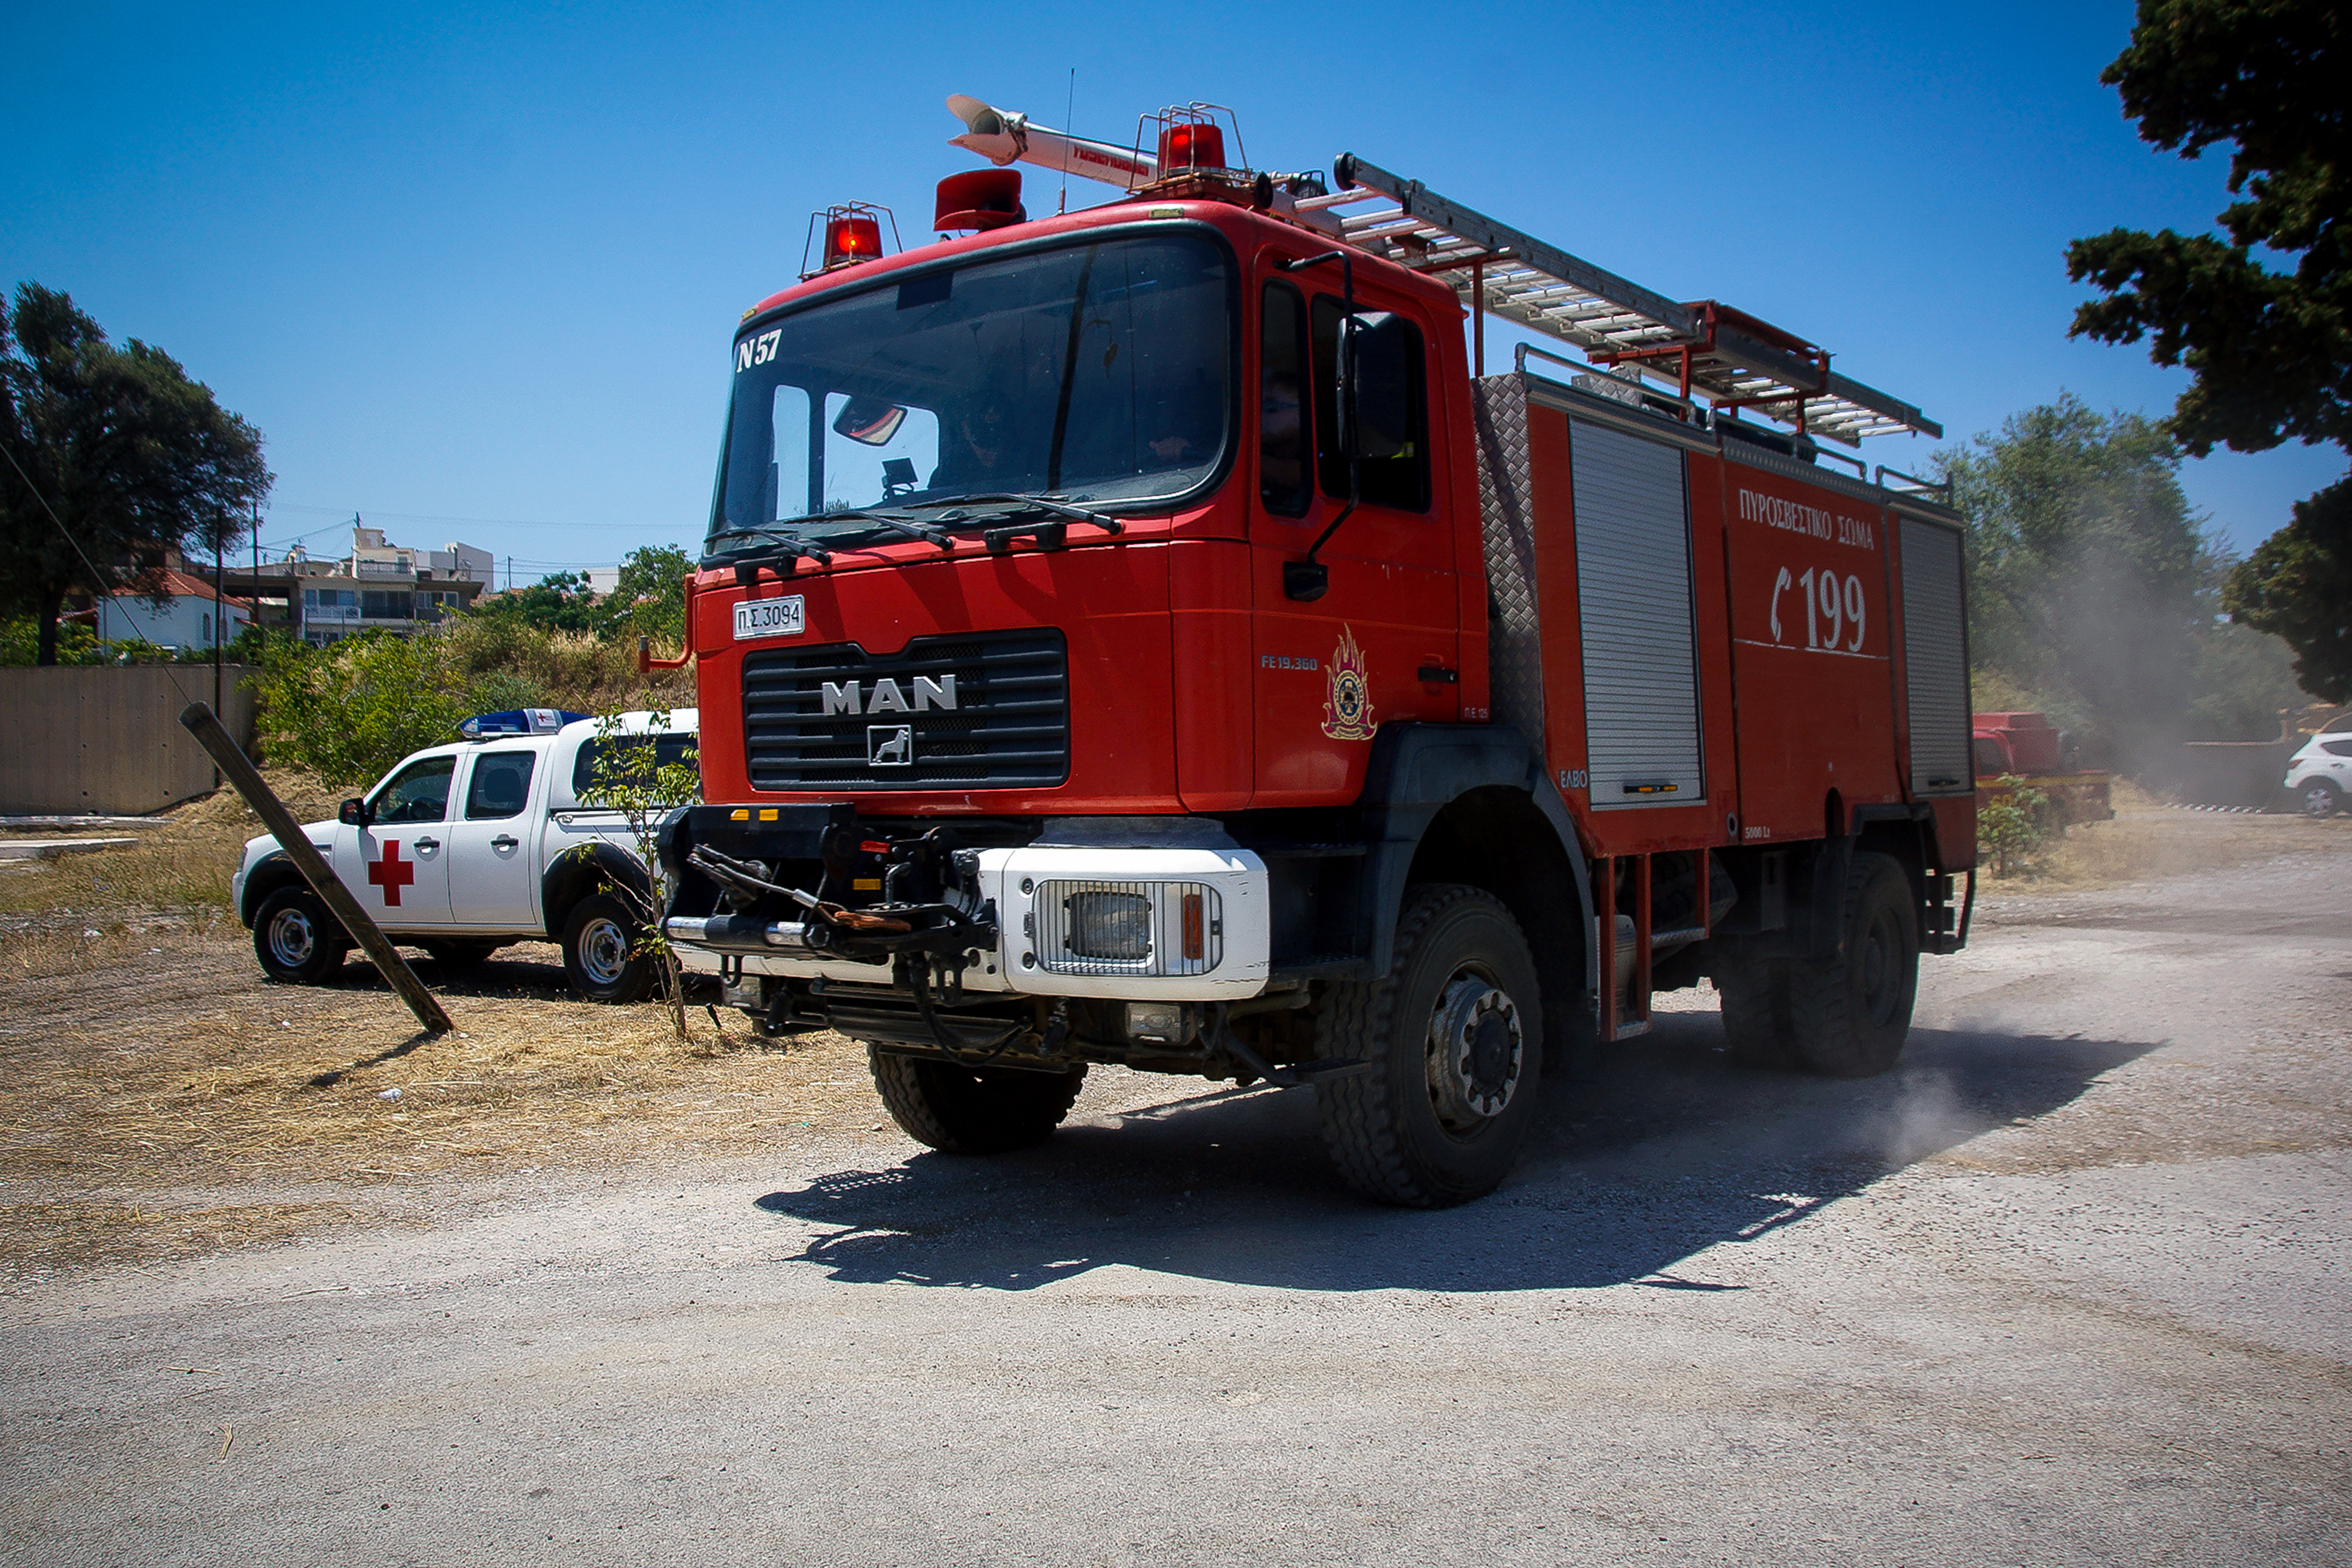 Fire Service, Greek Police could not communicate during wildfire